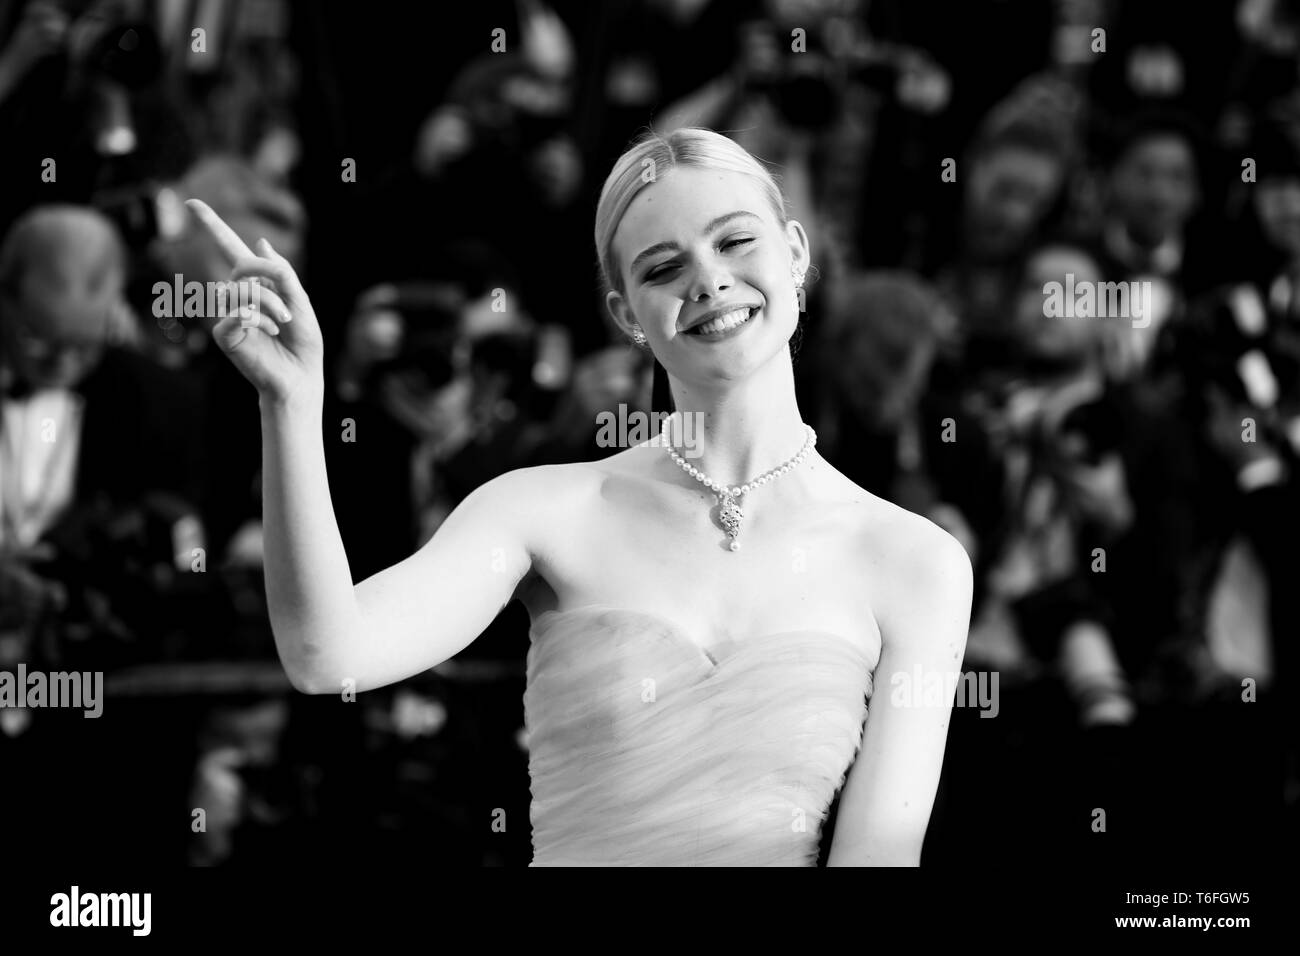 CANNES, FRANCE – MAY 24, 2017: Elle Fanning attends 'The Beguiled' screening at the 70th Cannes Film Festival (Photo: Mickael Chavet) Stock Photo